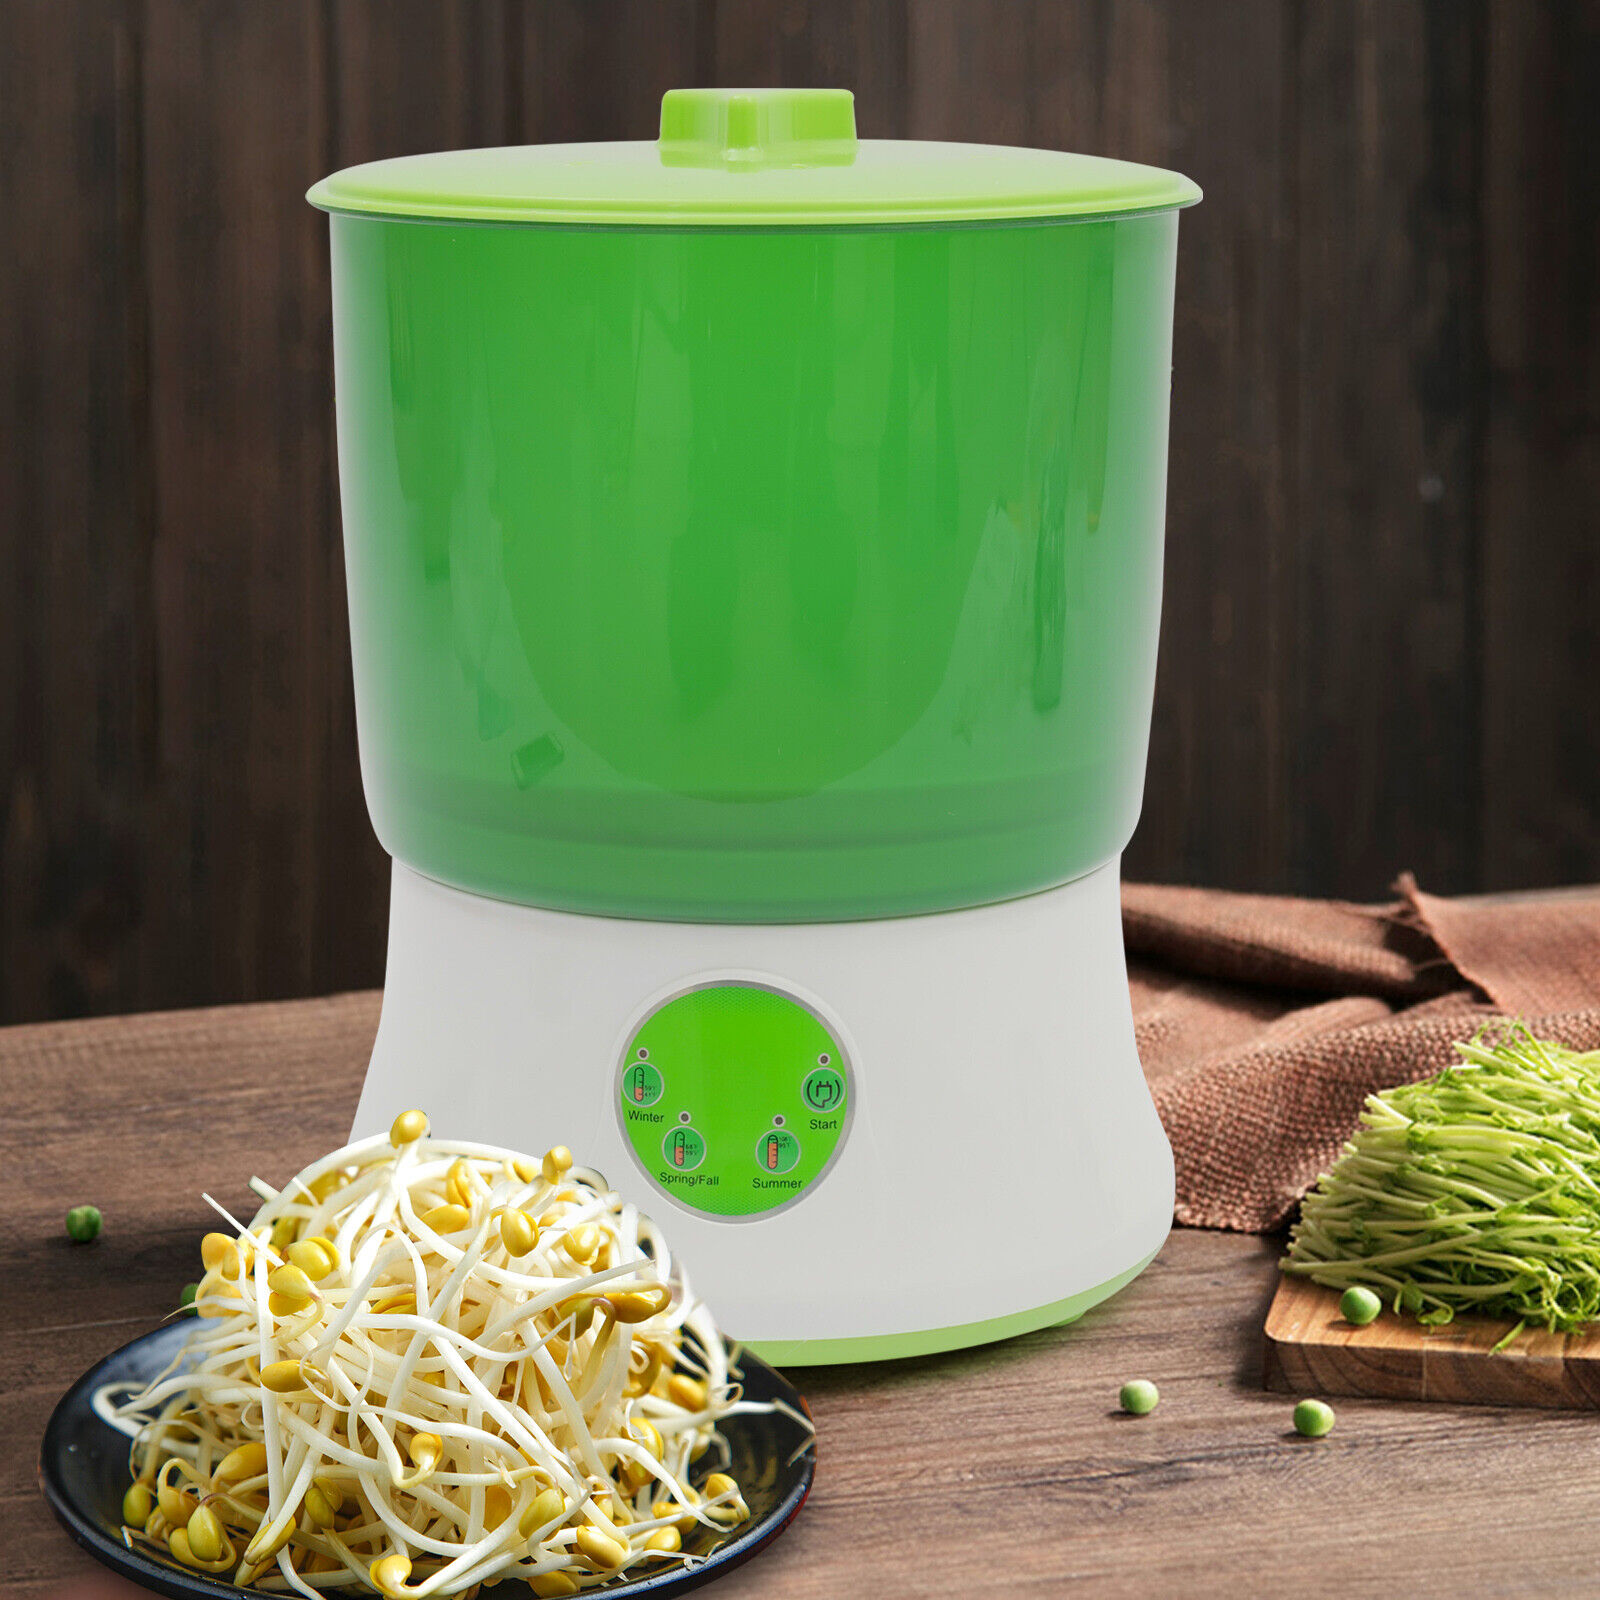 110V Automatic Bean Sprouts Machine 2-Layer Household Seed Sprouter Maker Green